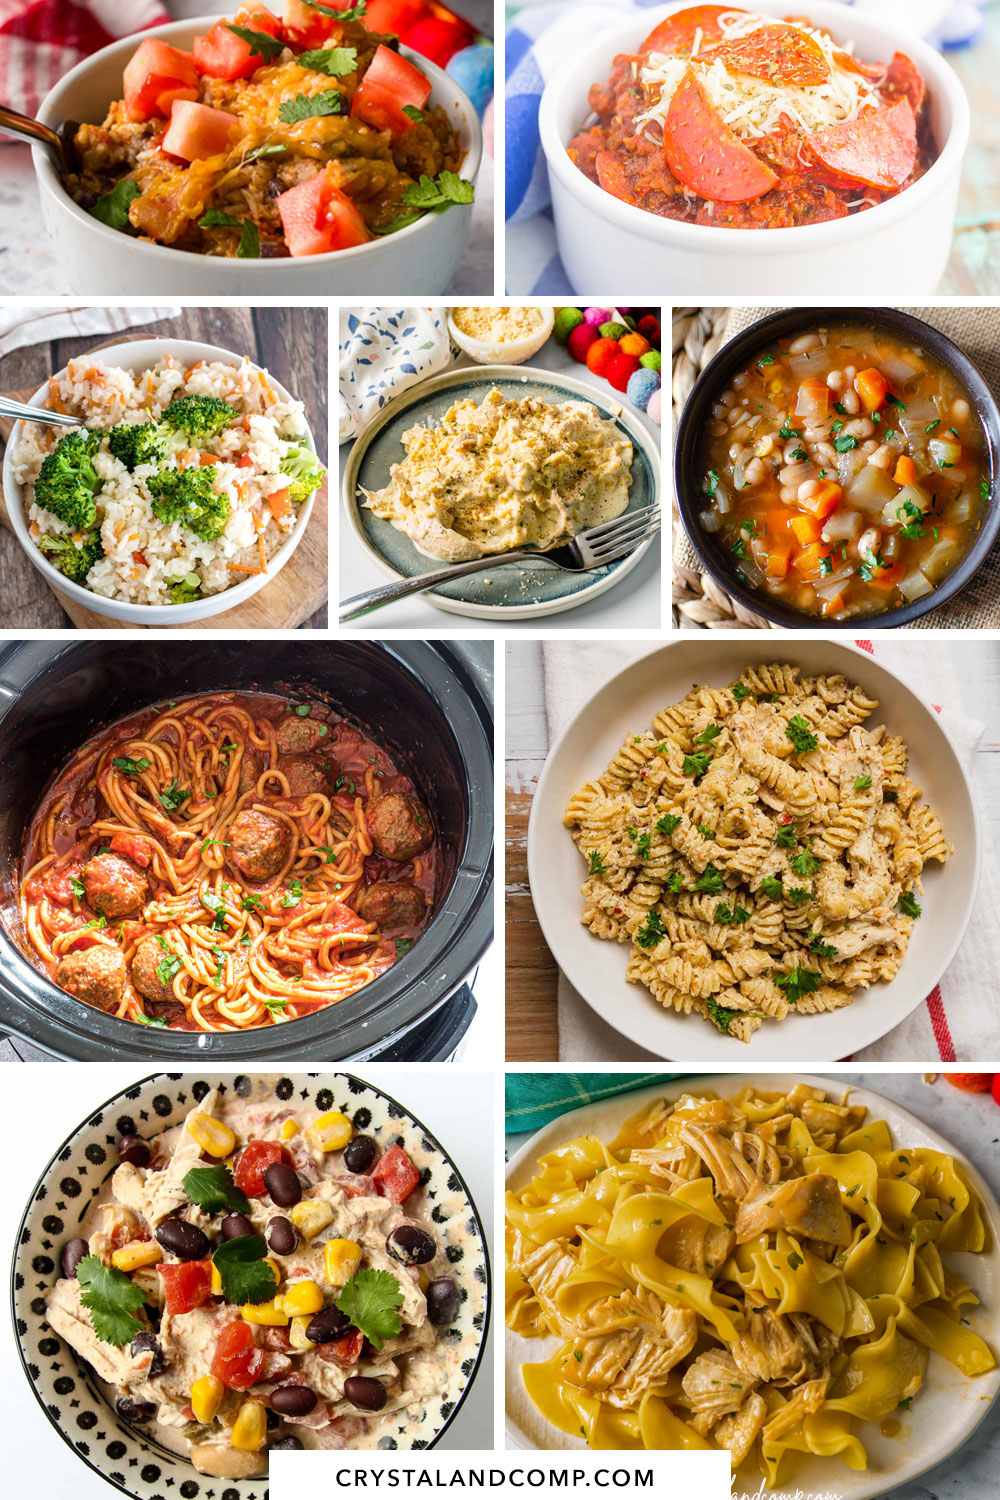 Cheap Slow Cooker Recipes for Large Families